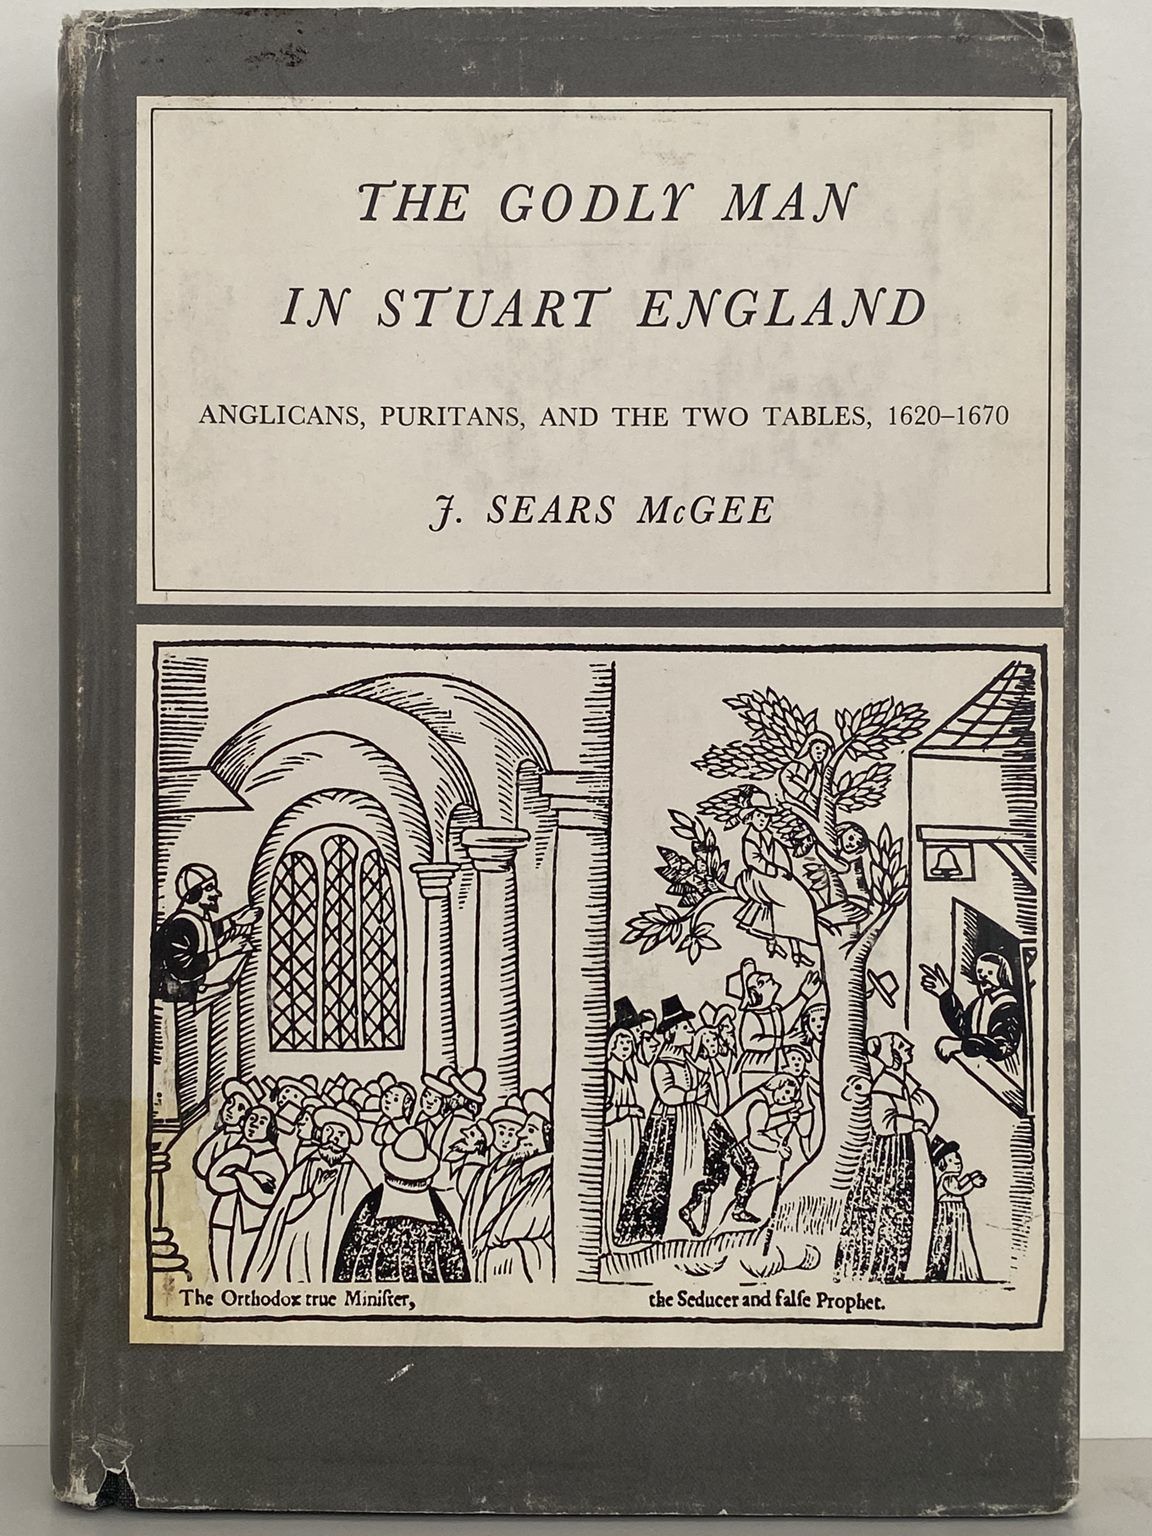 THE GODLY MAN IN STUART ENGLAND: Anglicans, Puritans, Two Tables 1620-1670